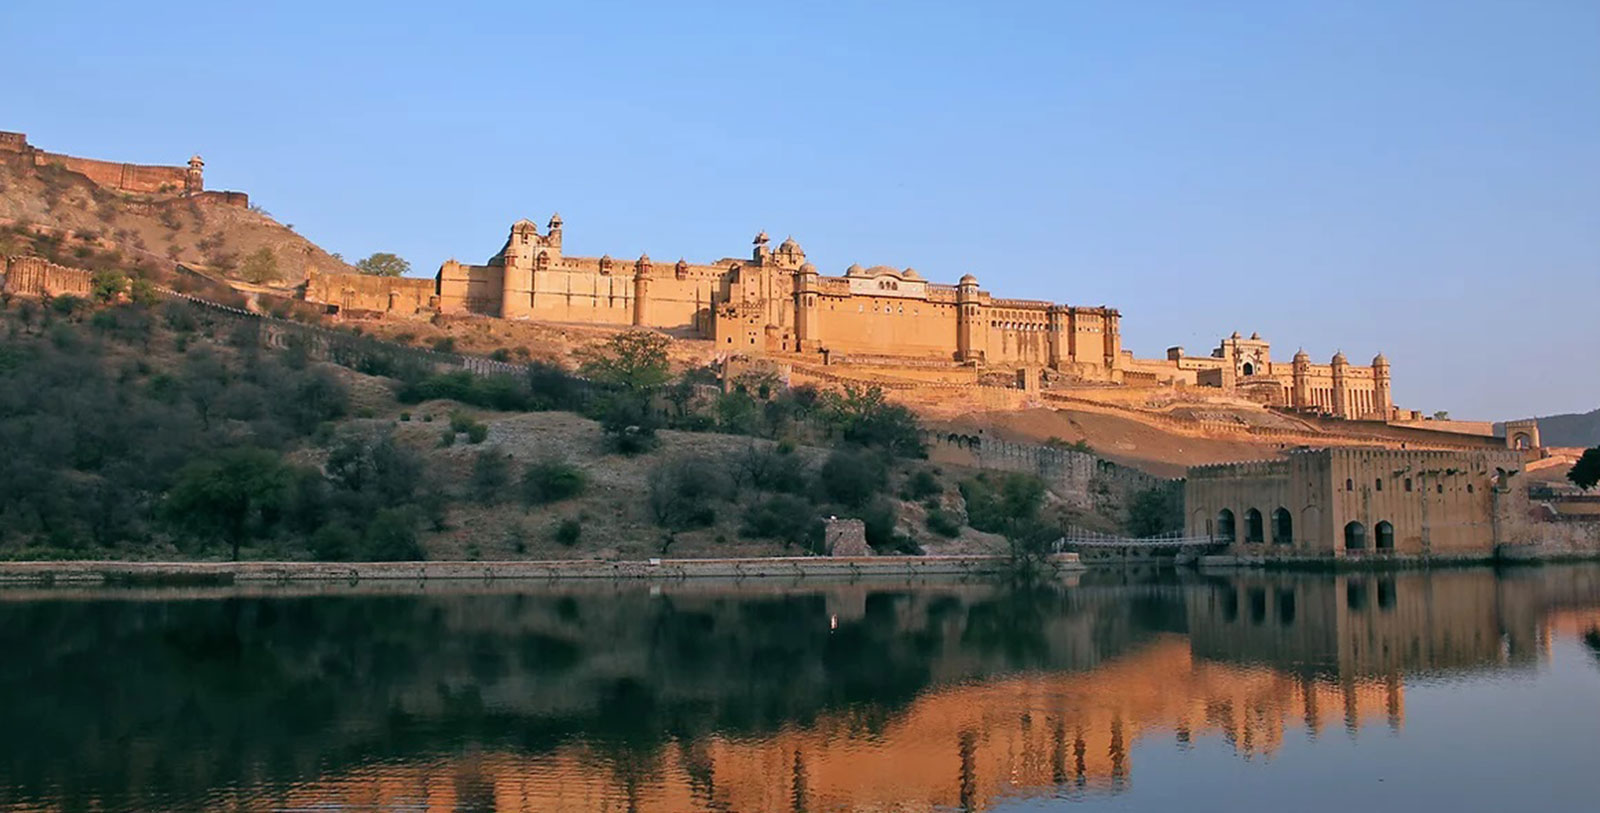 Tour the vibrant city of Jaipur with its ancient monuments, exemplary gardens, and peripheral walls.